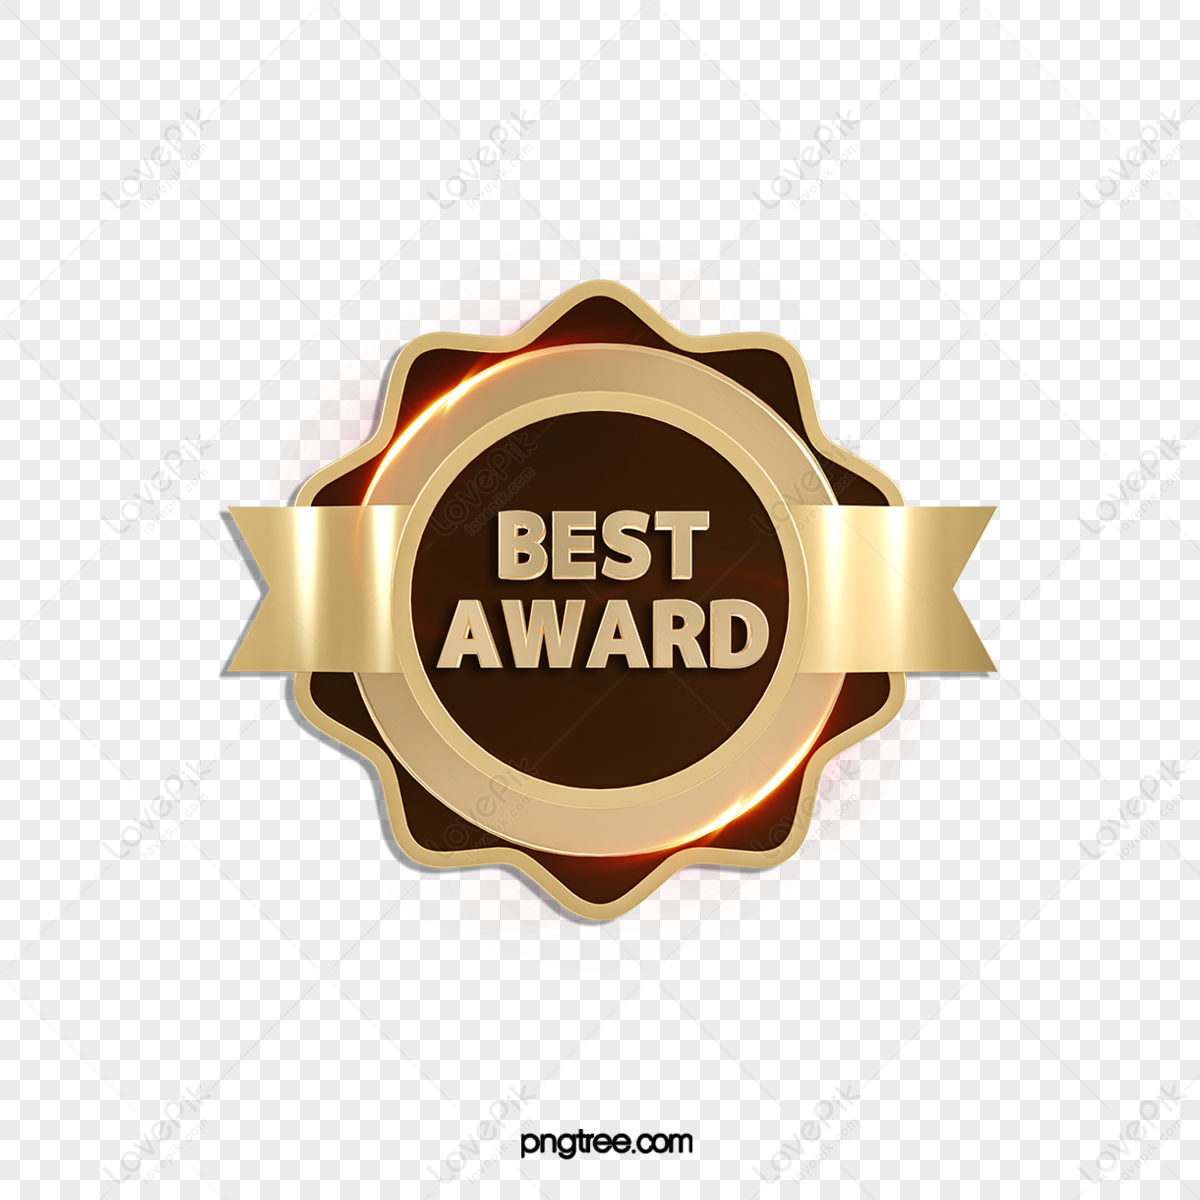 Graphic Downloads | AVA Awards Store